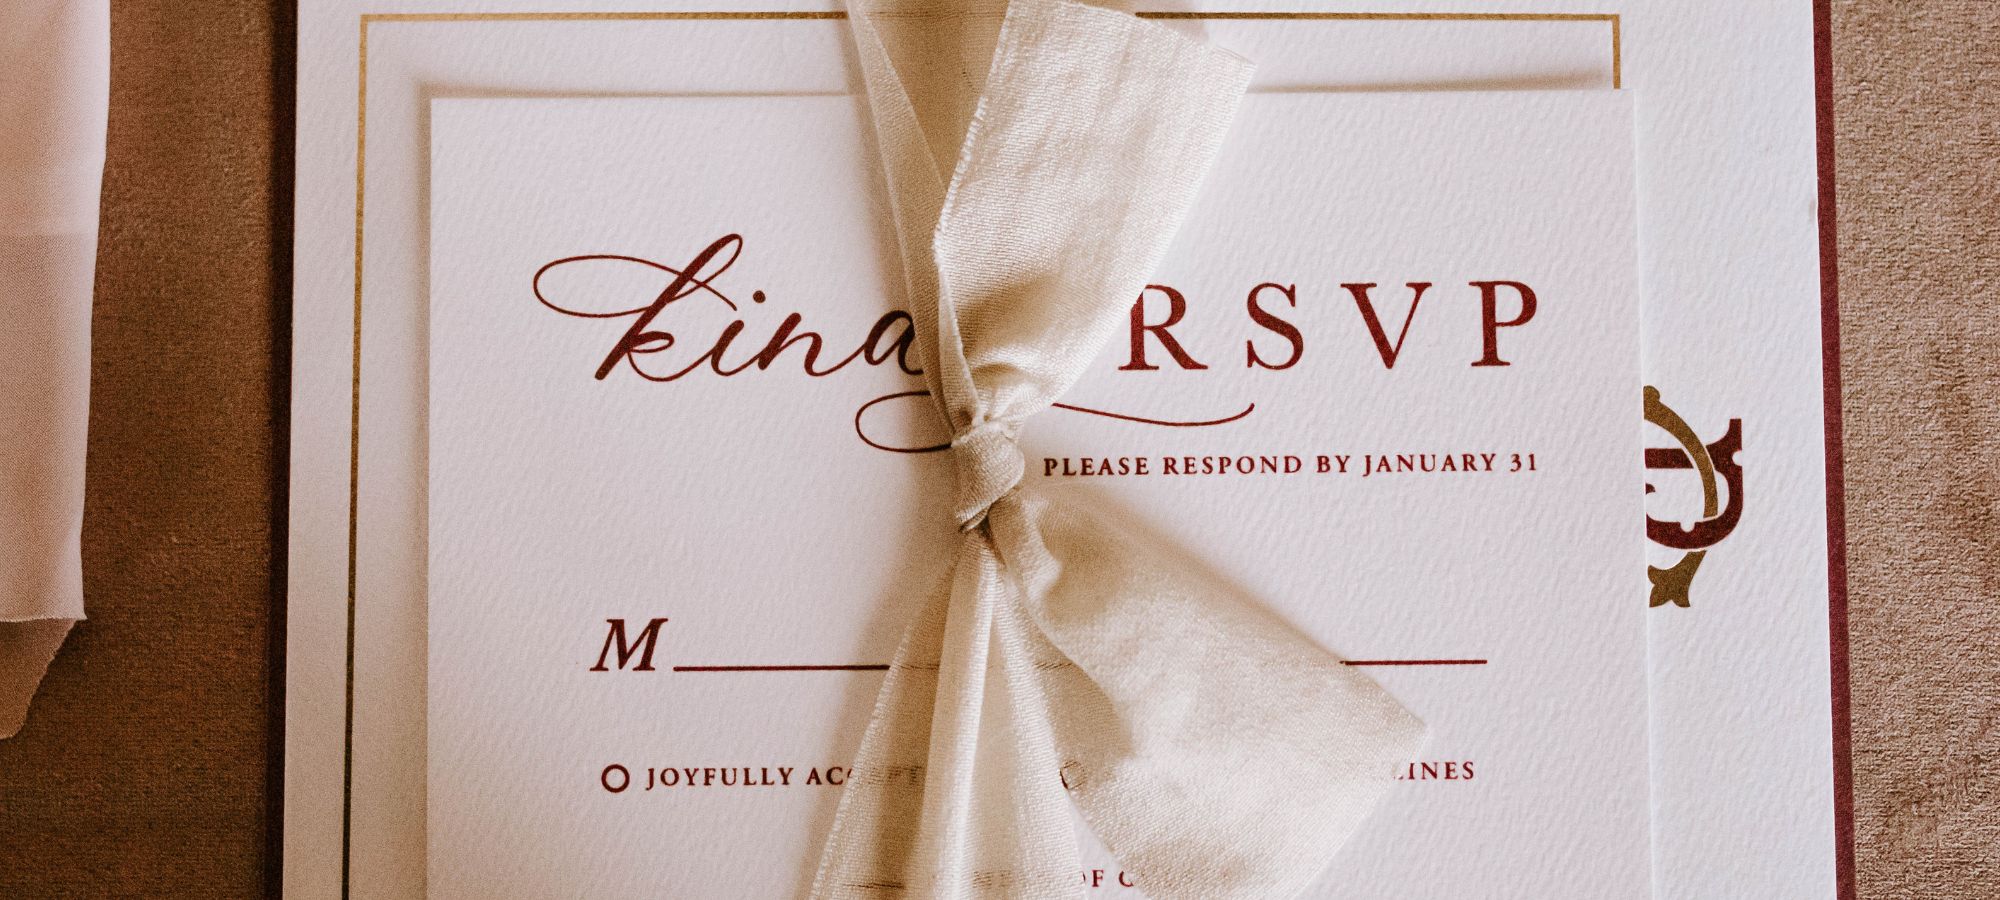 Engagement invitation message ideas for your ring ceremony - Tuko.co.ke